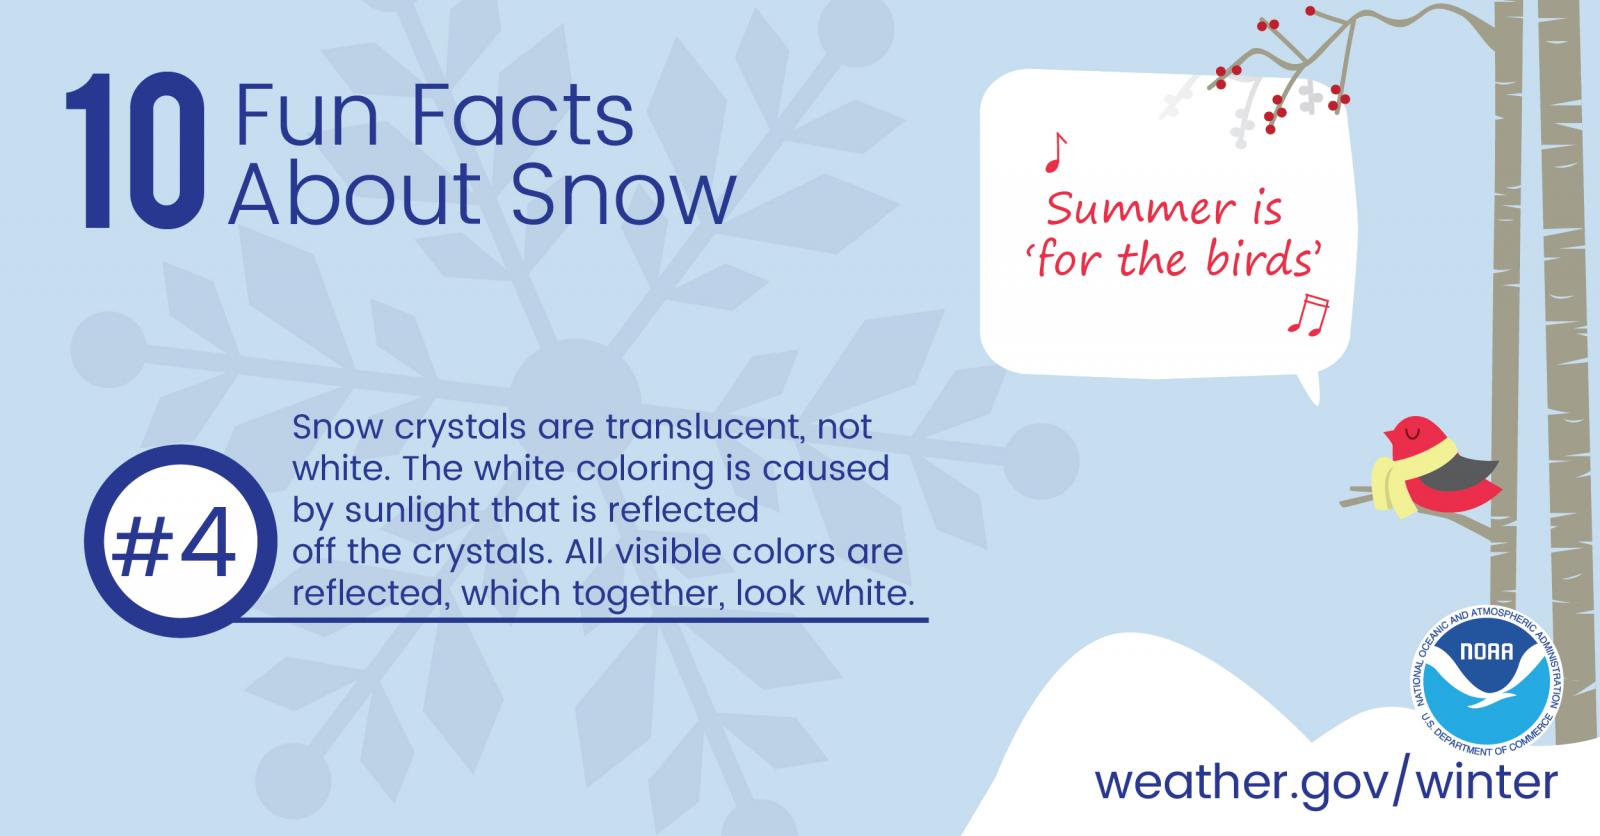 10 Fun Facts About Snow: #4. Snow crystals are translucent, not white. The white coloring is caused by sunlight that is reflected off the crystals. All visible colors are reflected, which together, look white.